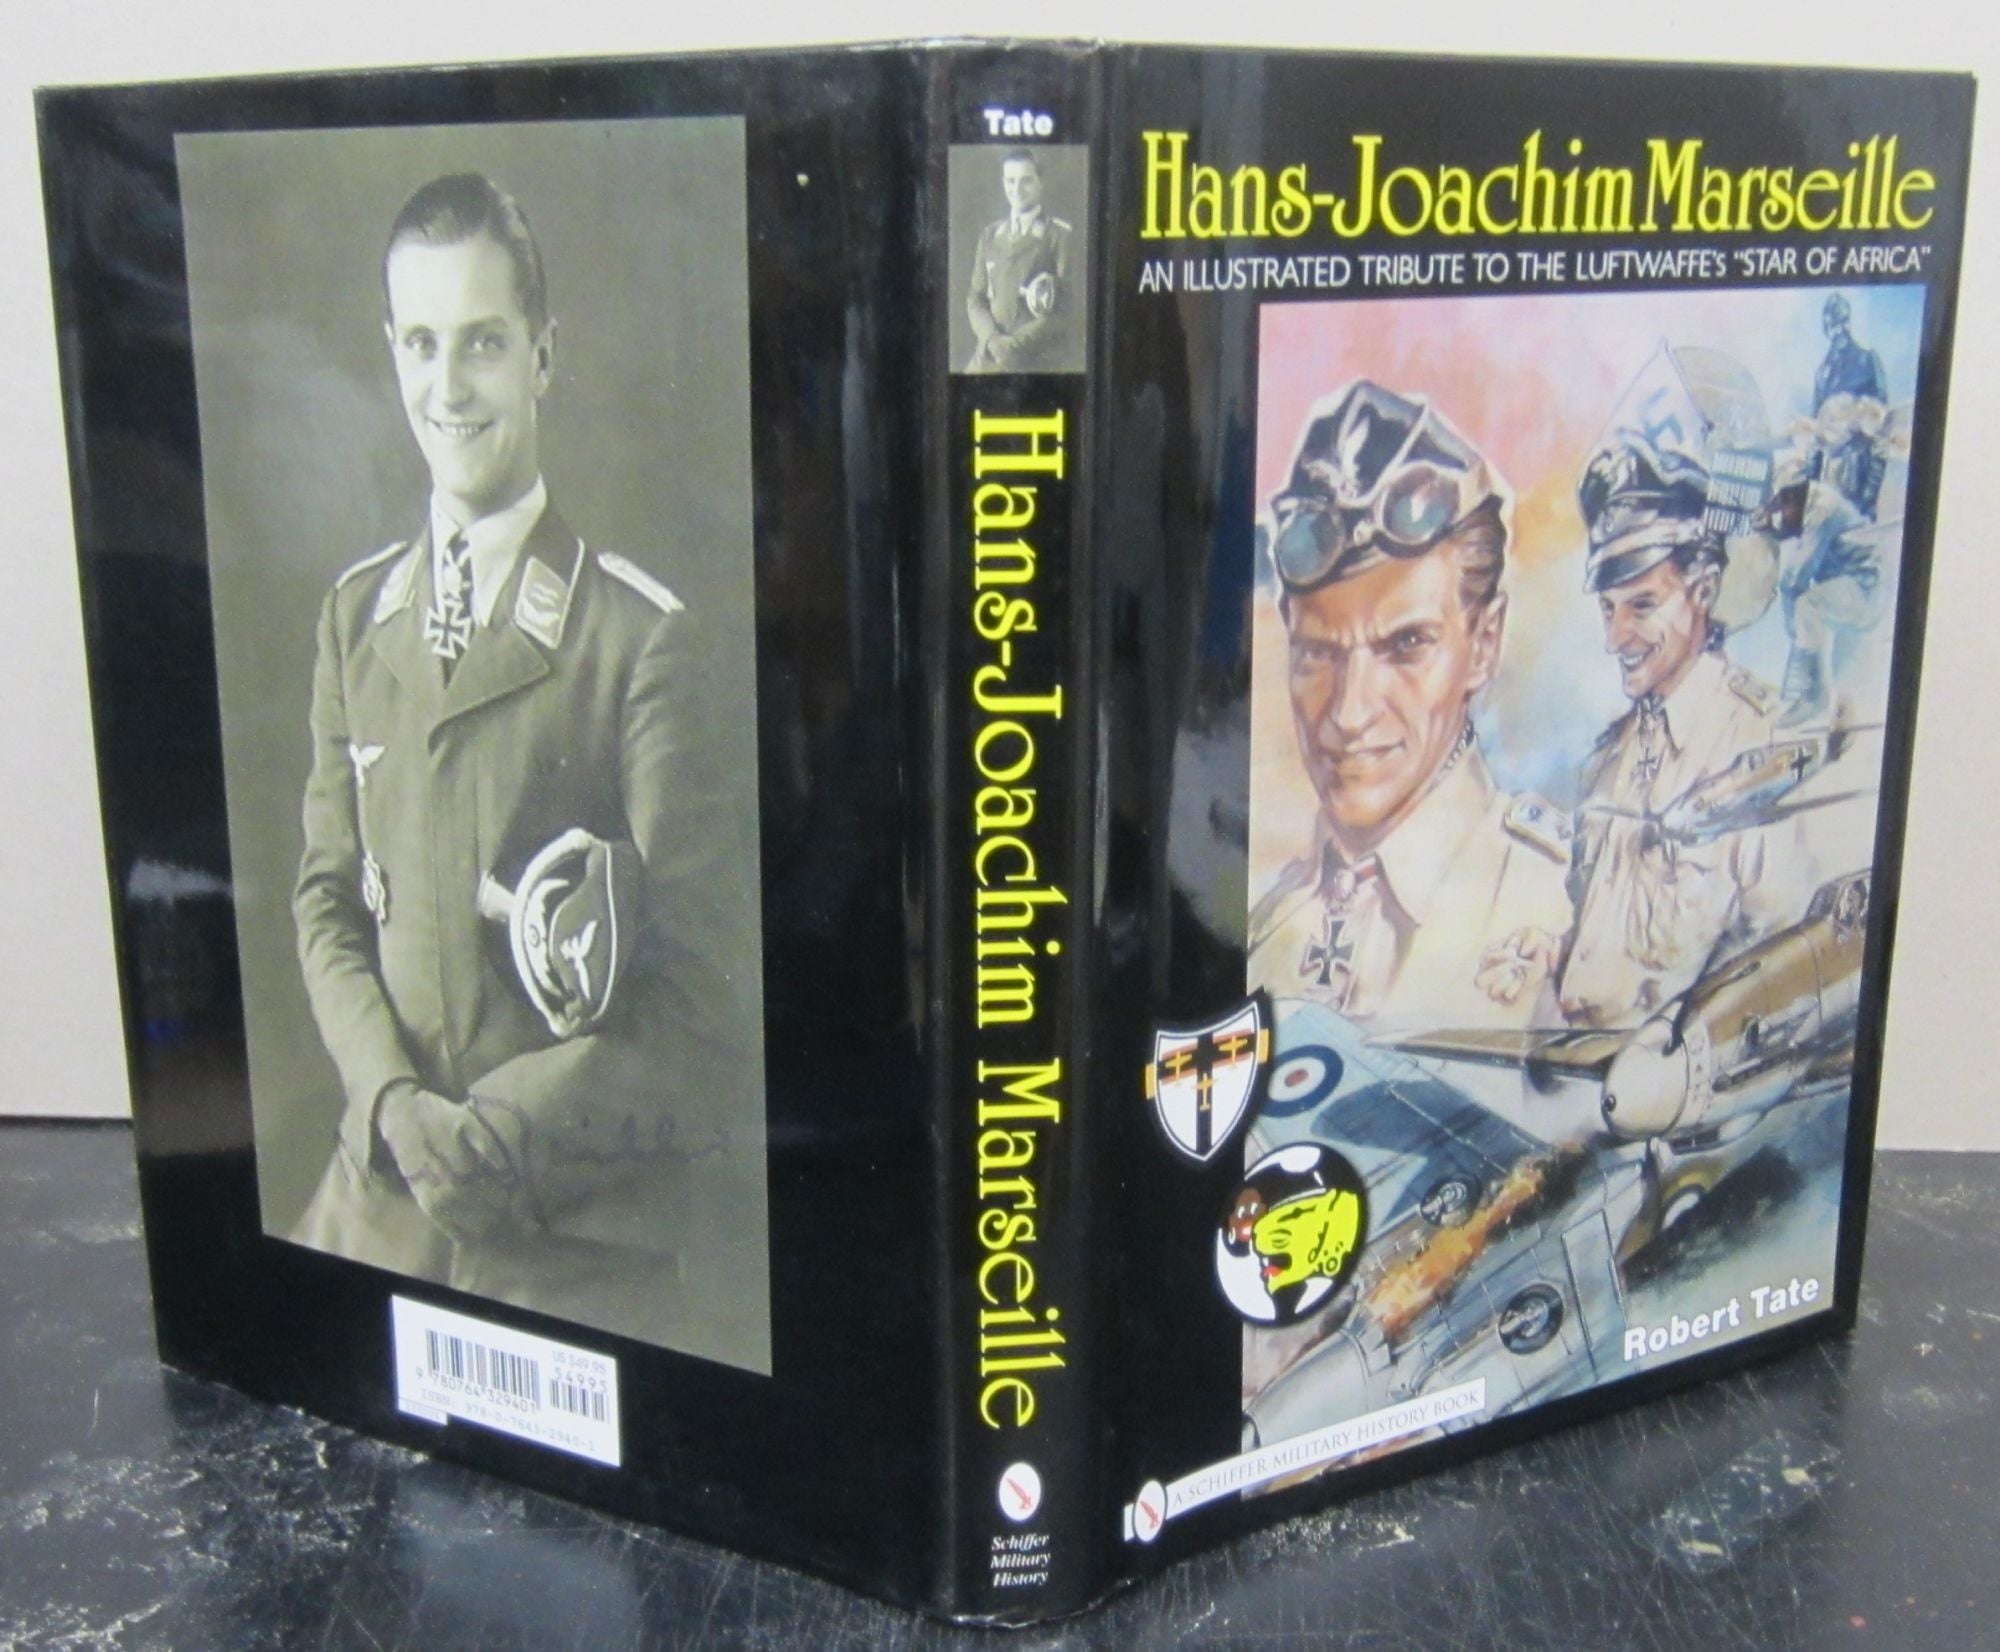 Hans-Joachim Marseille: An Illustrated Tribute to the Luftwaffe's 